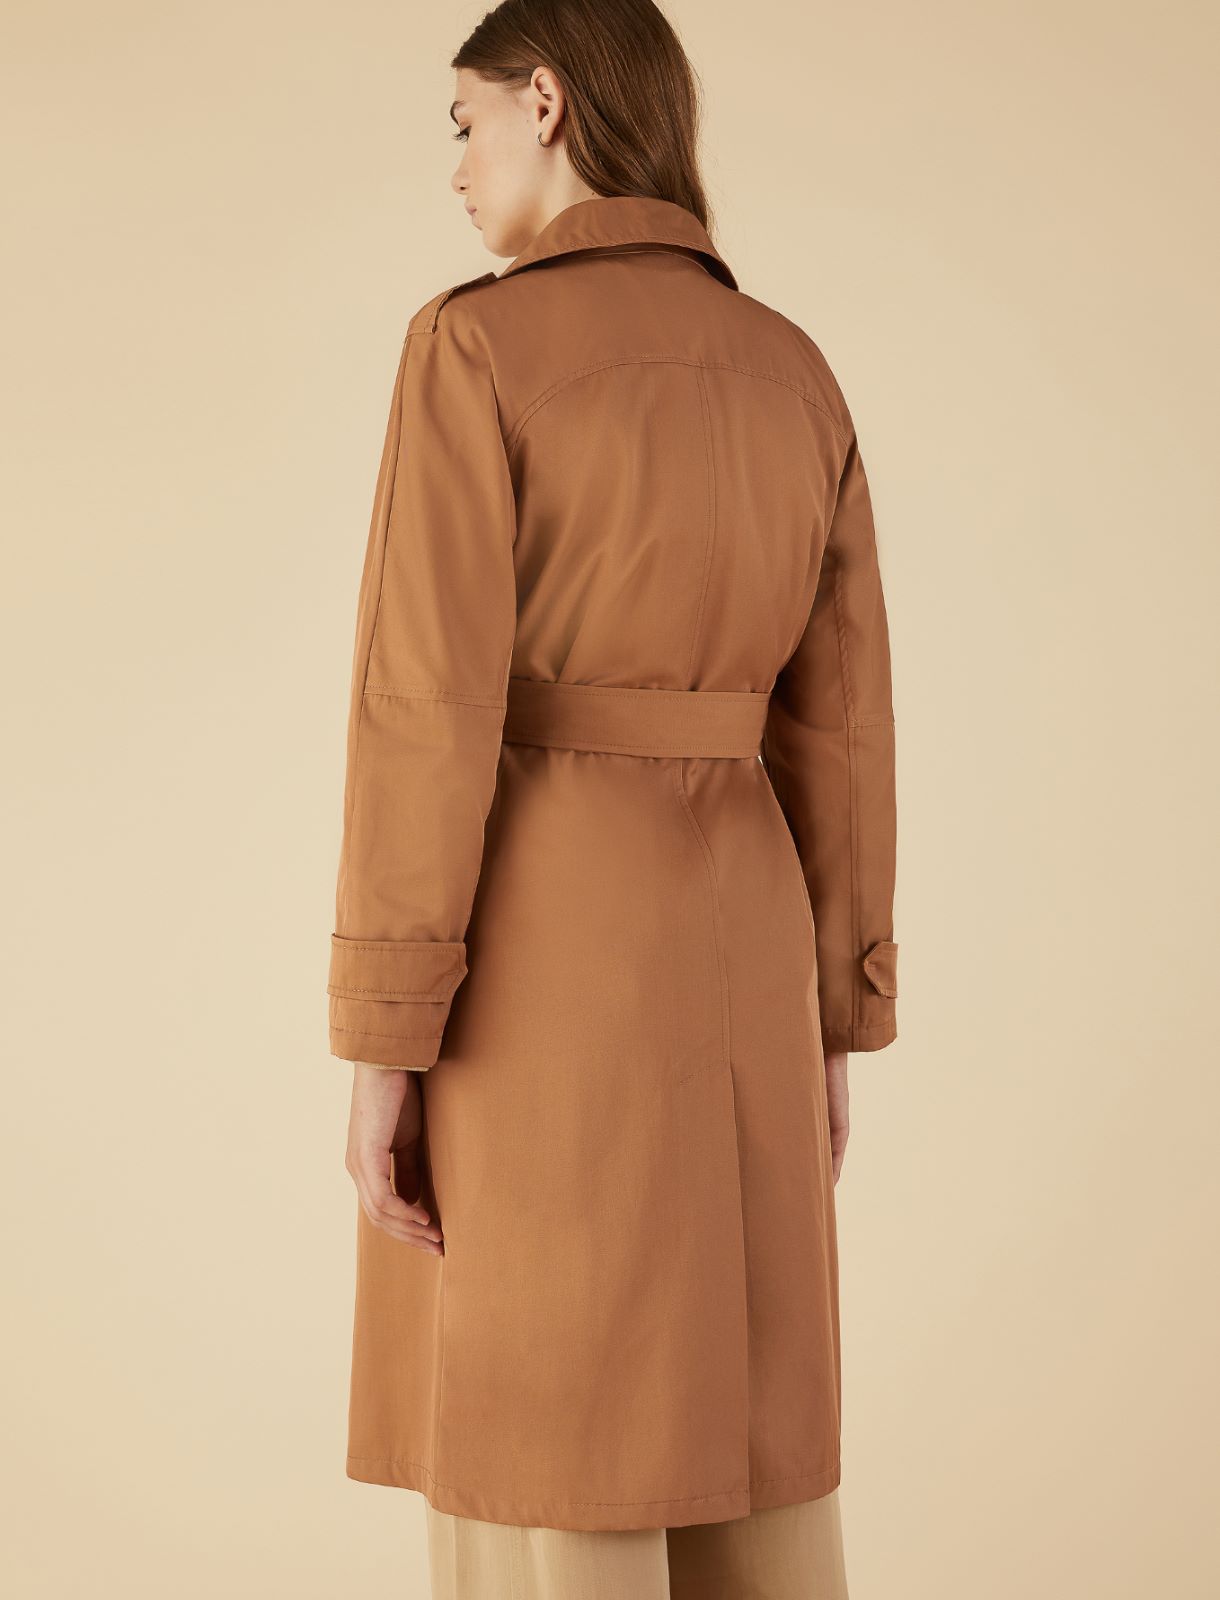 Double-breasted trench - Camel - Marella - 2